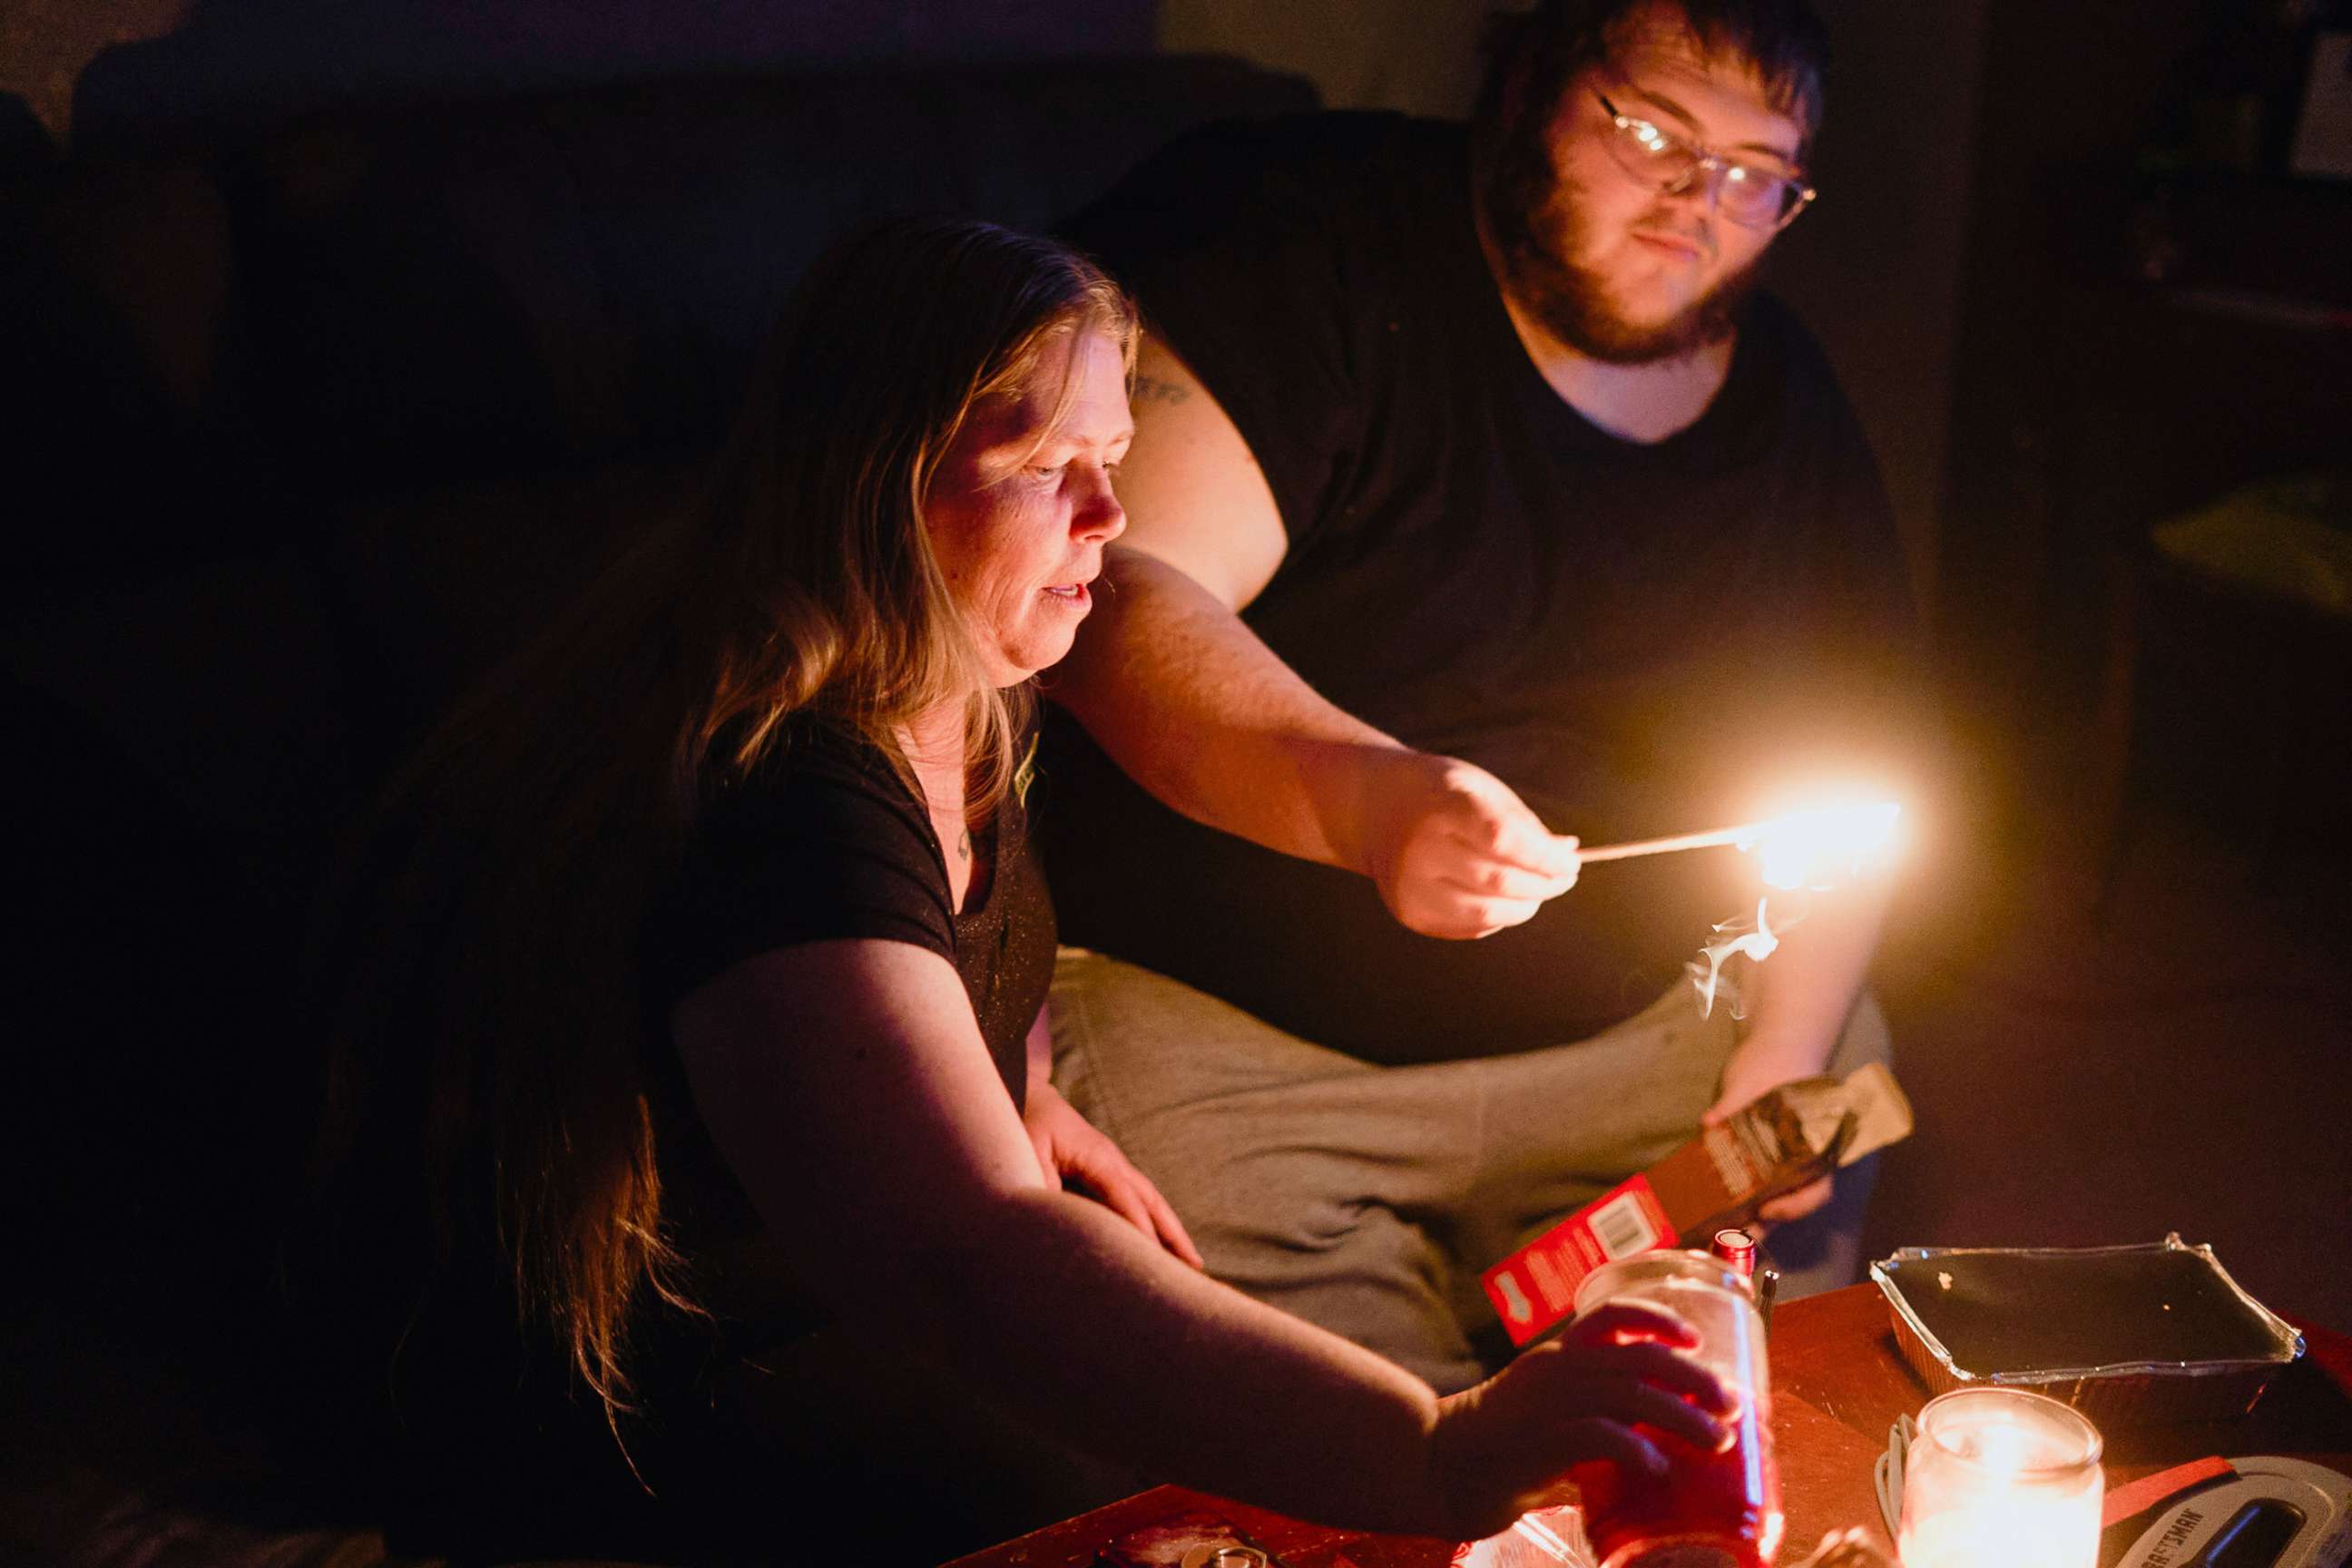 PHOTO: Christina Beverly and John Shearon light candles in their home after winter weather caused electricity blackouts and "boil water" notices in Fort Worth, Texas, Feb. 20, 2021.